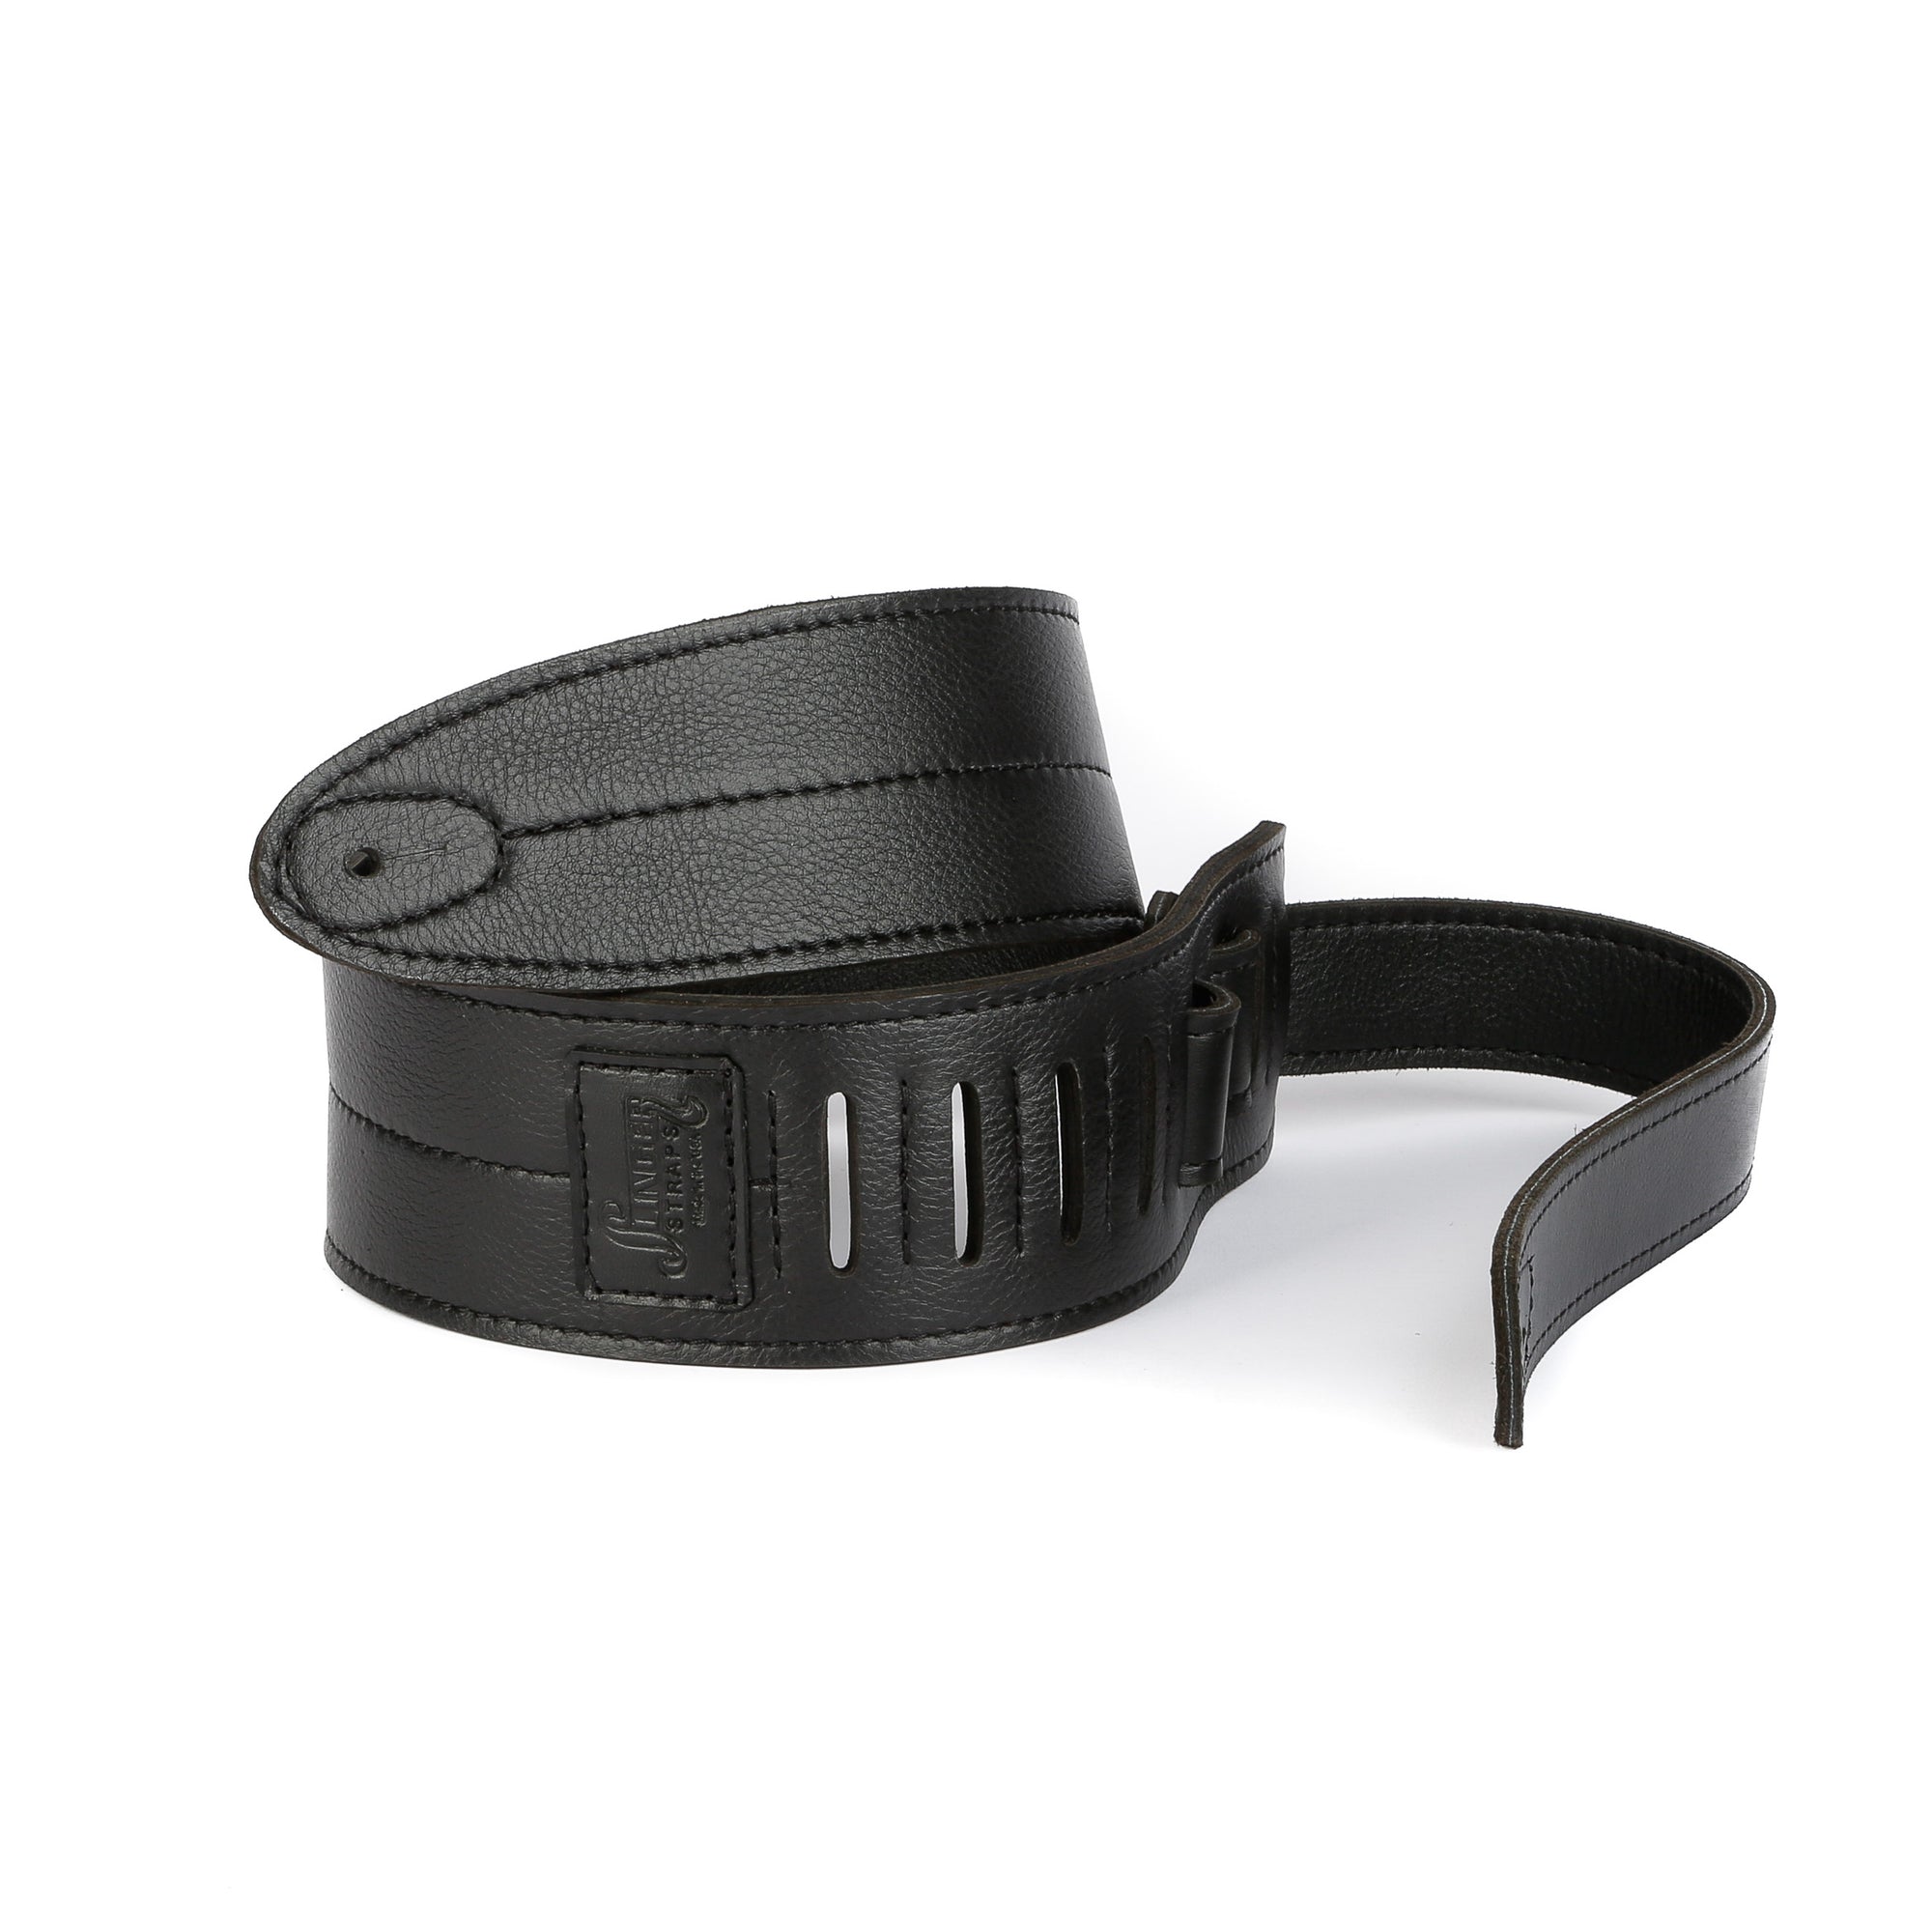 3-inch wide black leather guitar strap with stitch down the middle and rolled up